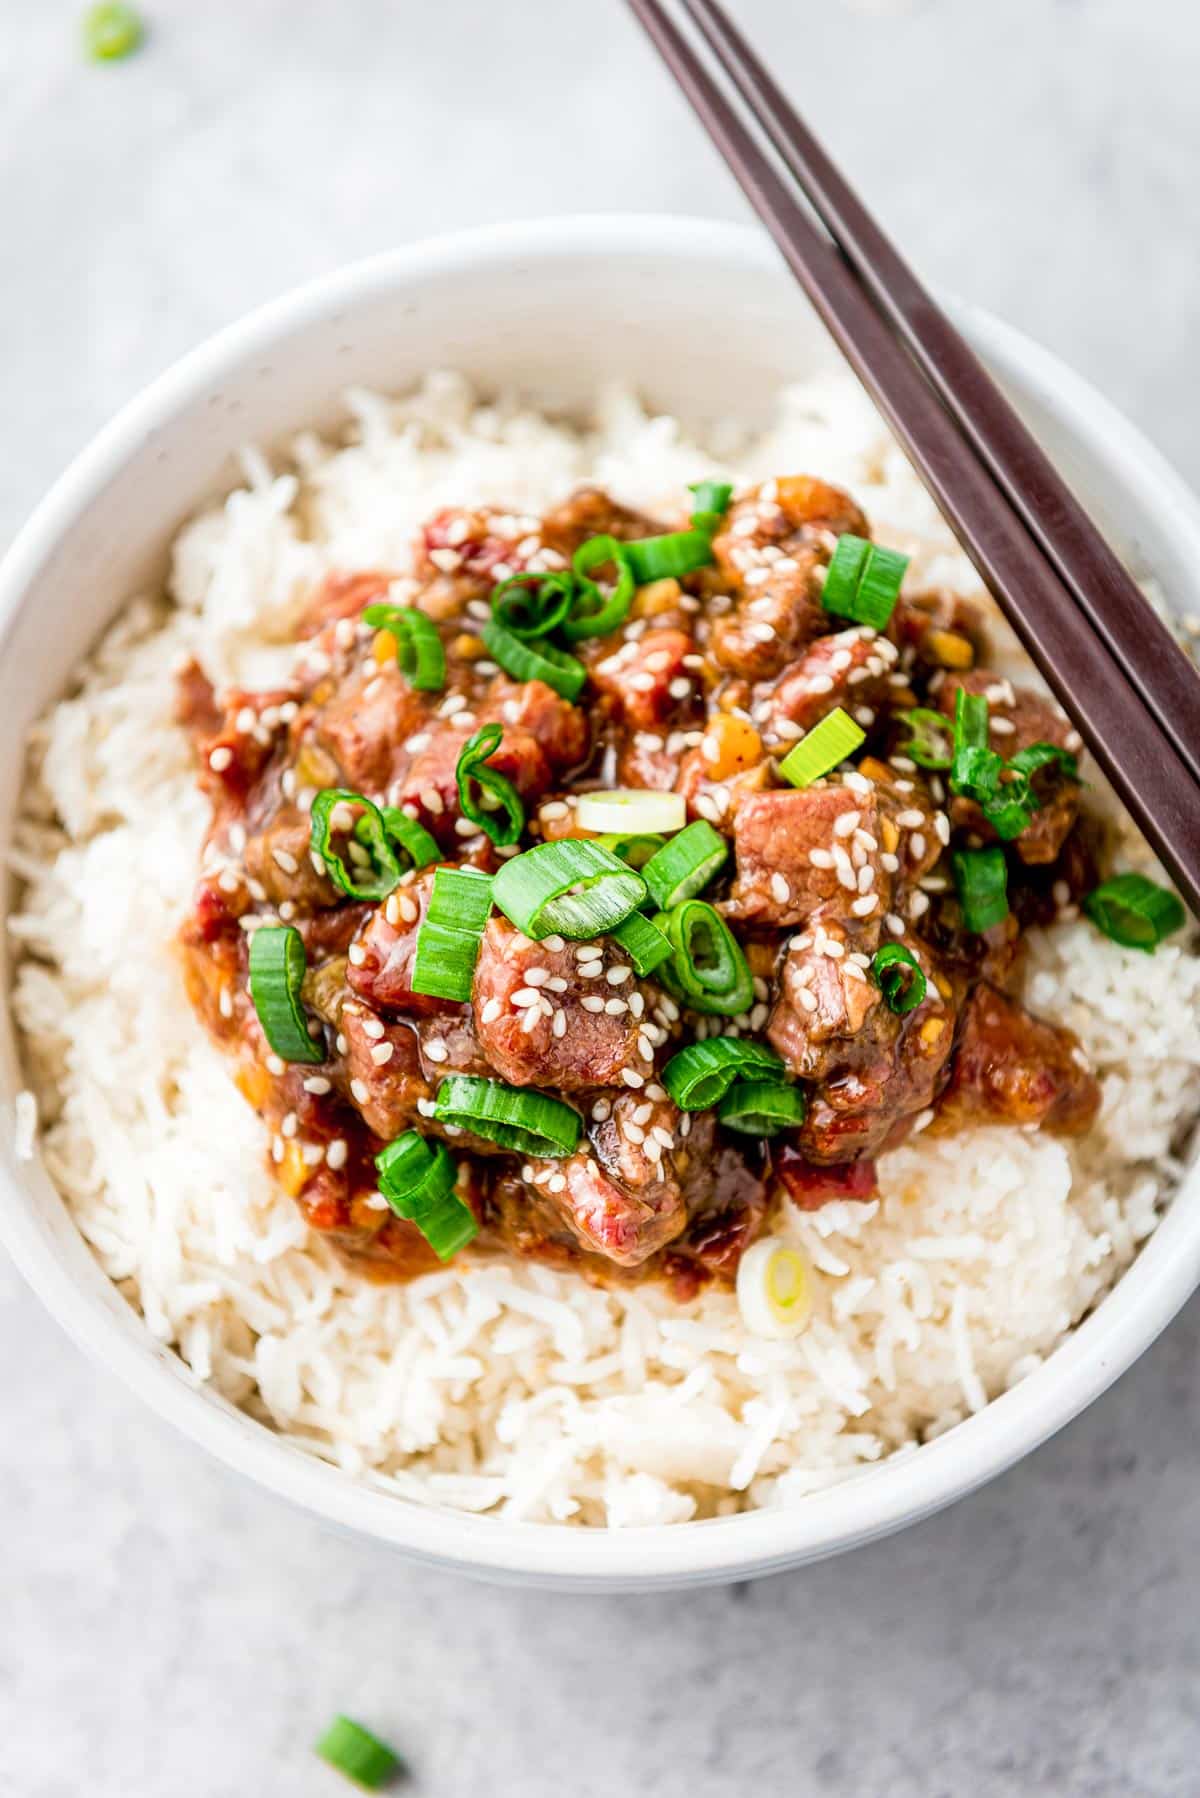 A pair of chopsticks on top of a white bowl filled with Slow Cooker Mongolian Beef on white rice on top of a gray surface.